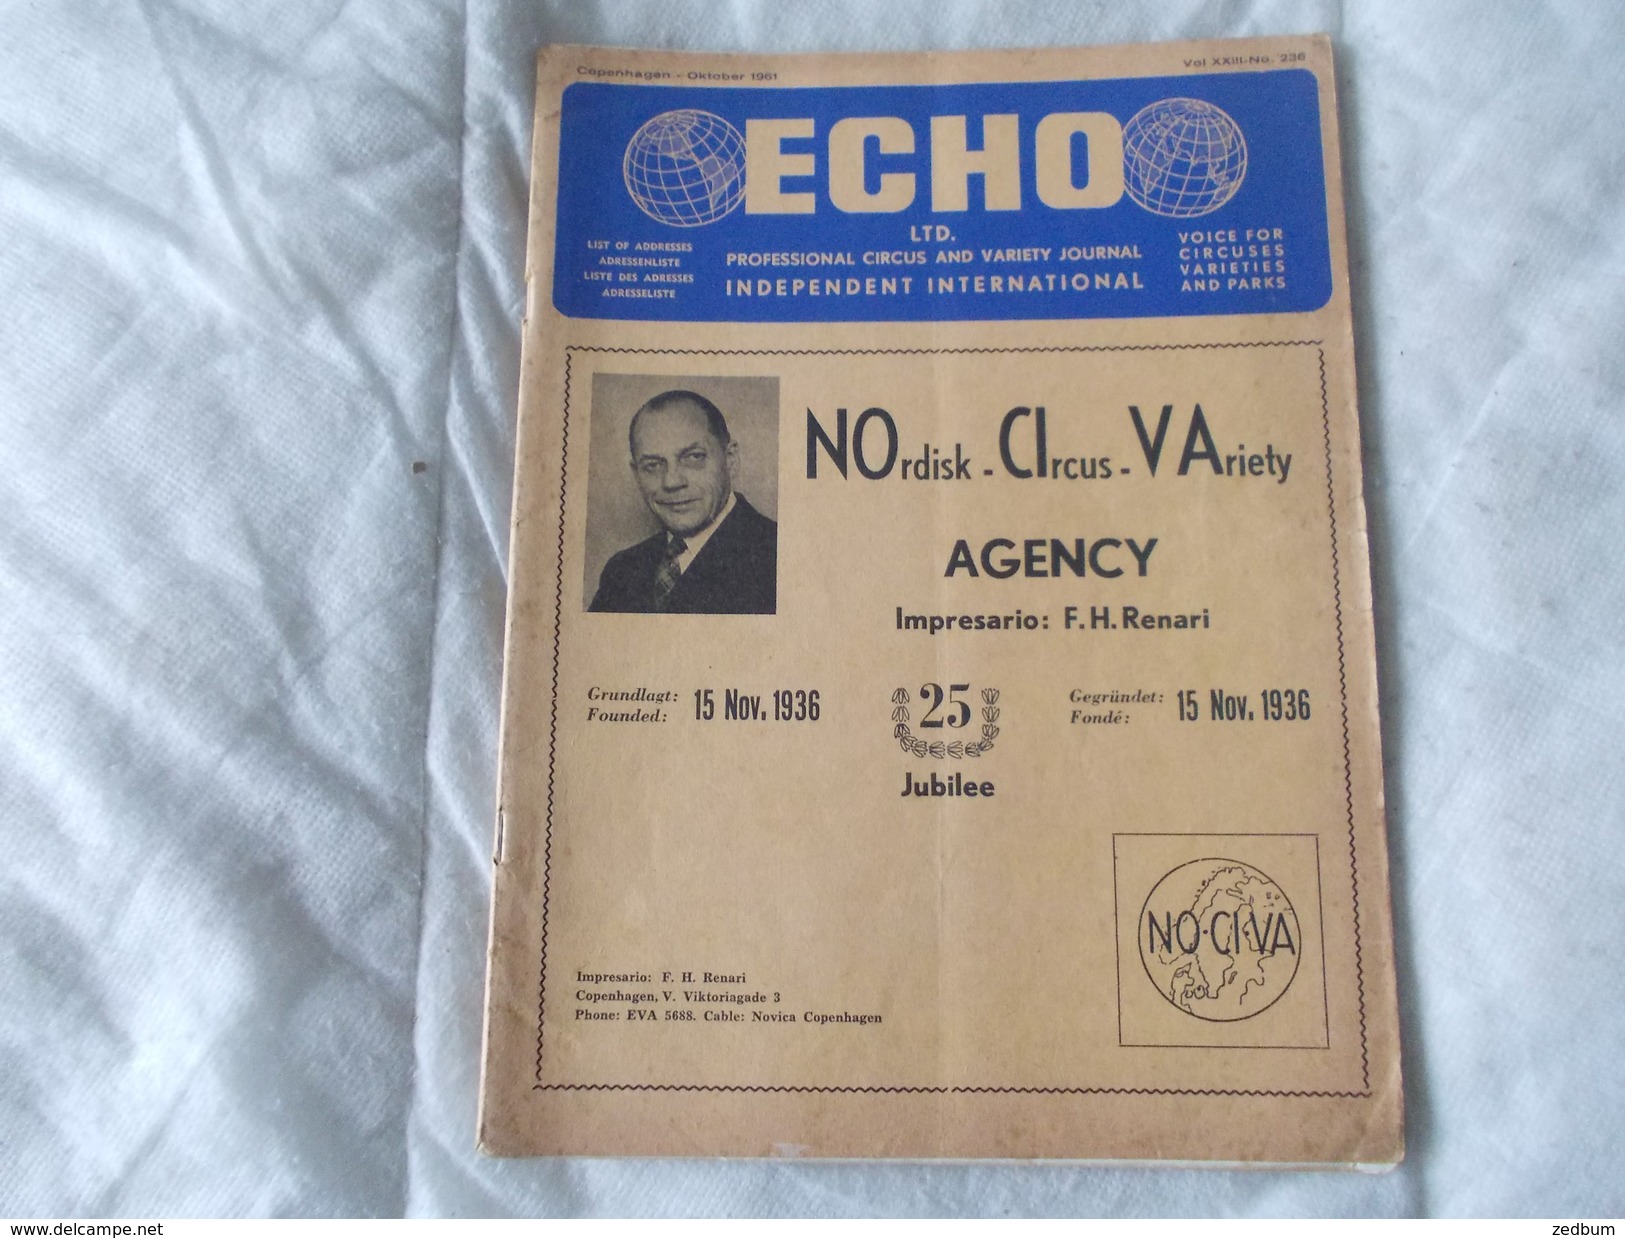 ECHO LTD Professional Circus And Variety Journal Independent International N° 236 October 1961 - Entretenimiento